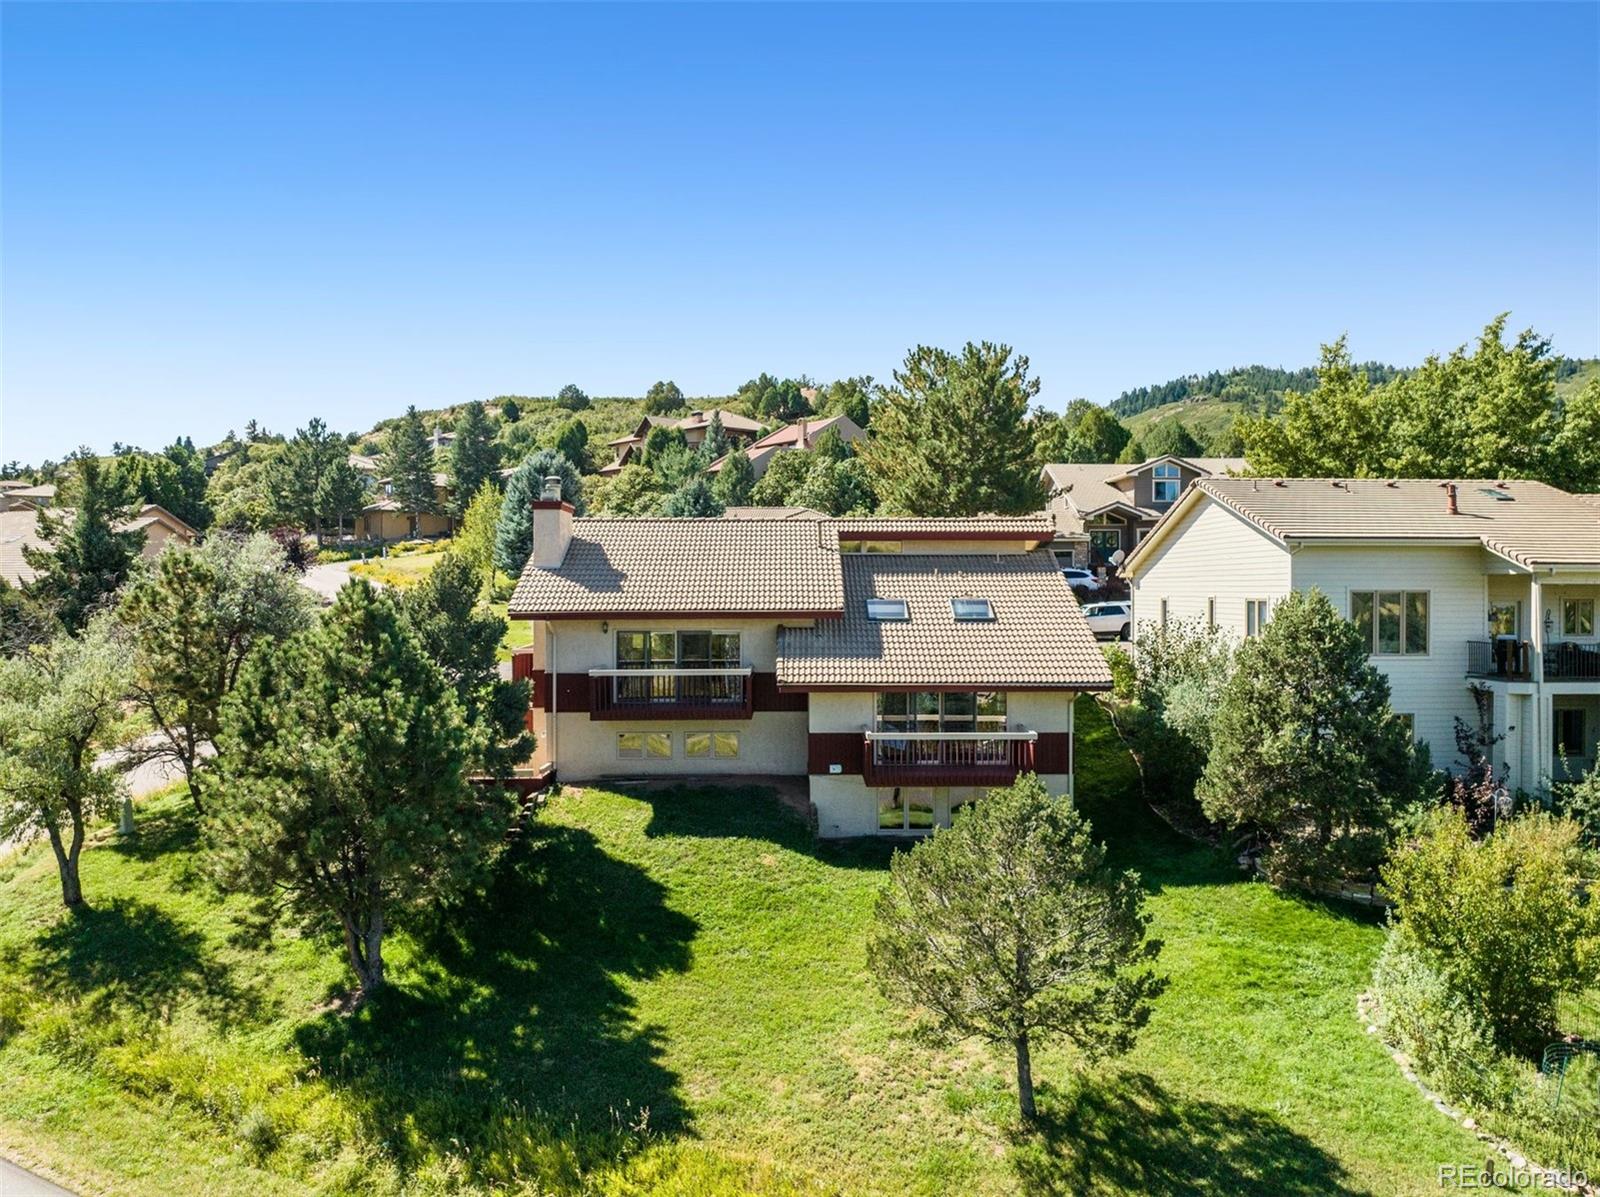 6897  big horn trail, Littleton sold home. Closed on 2024-04-23 for $737,500.